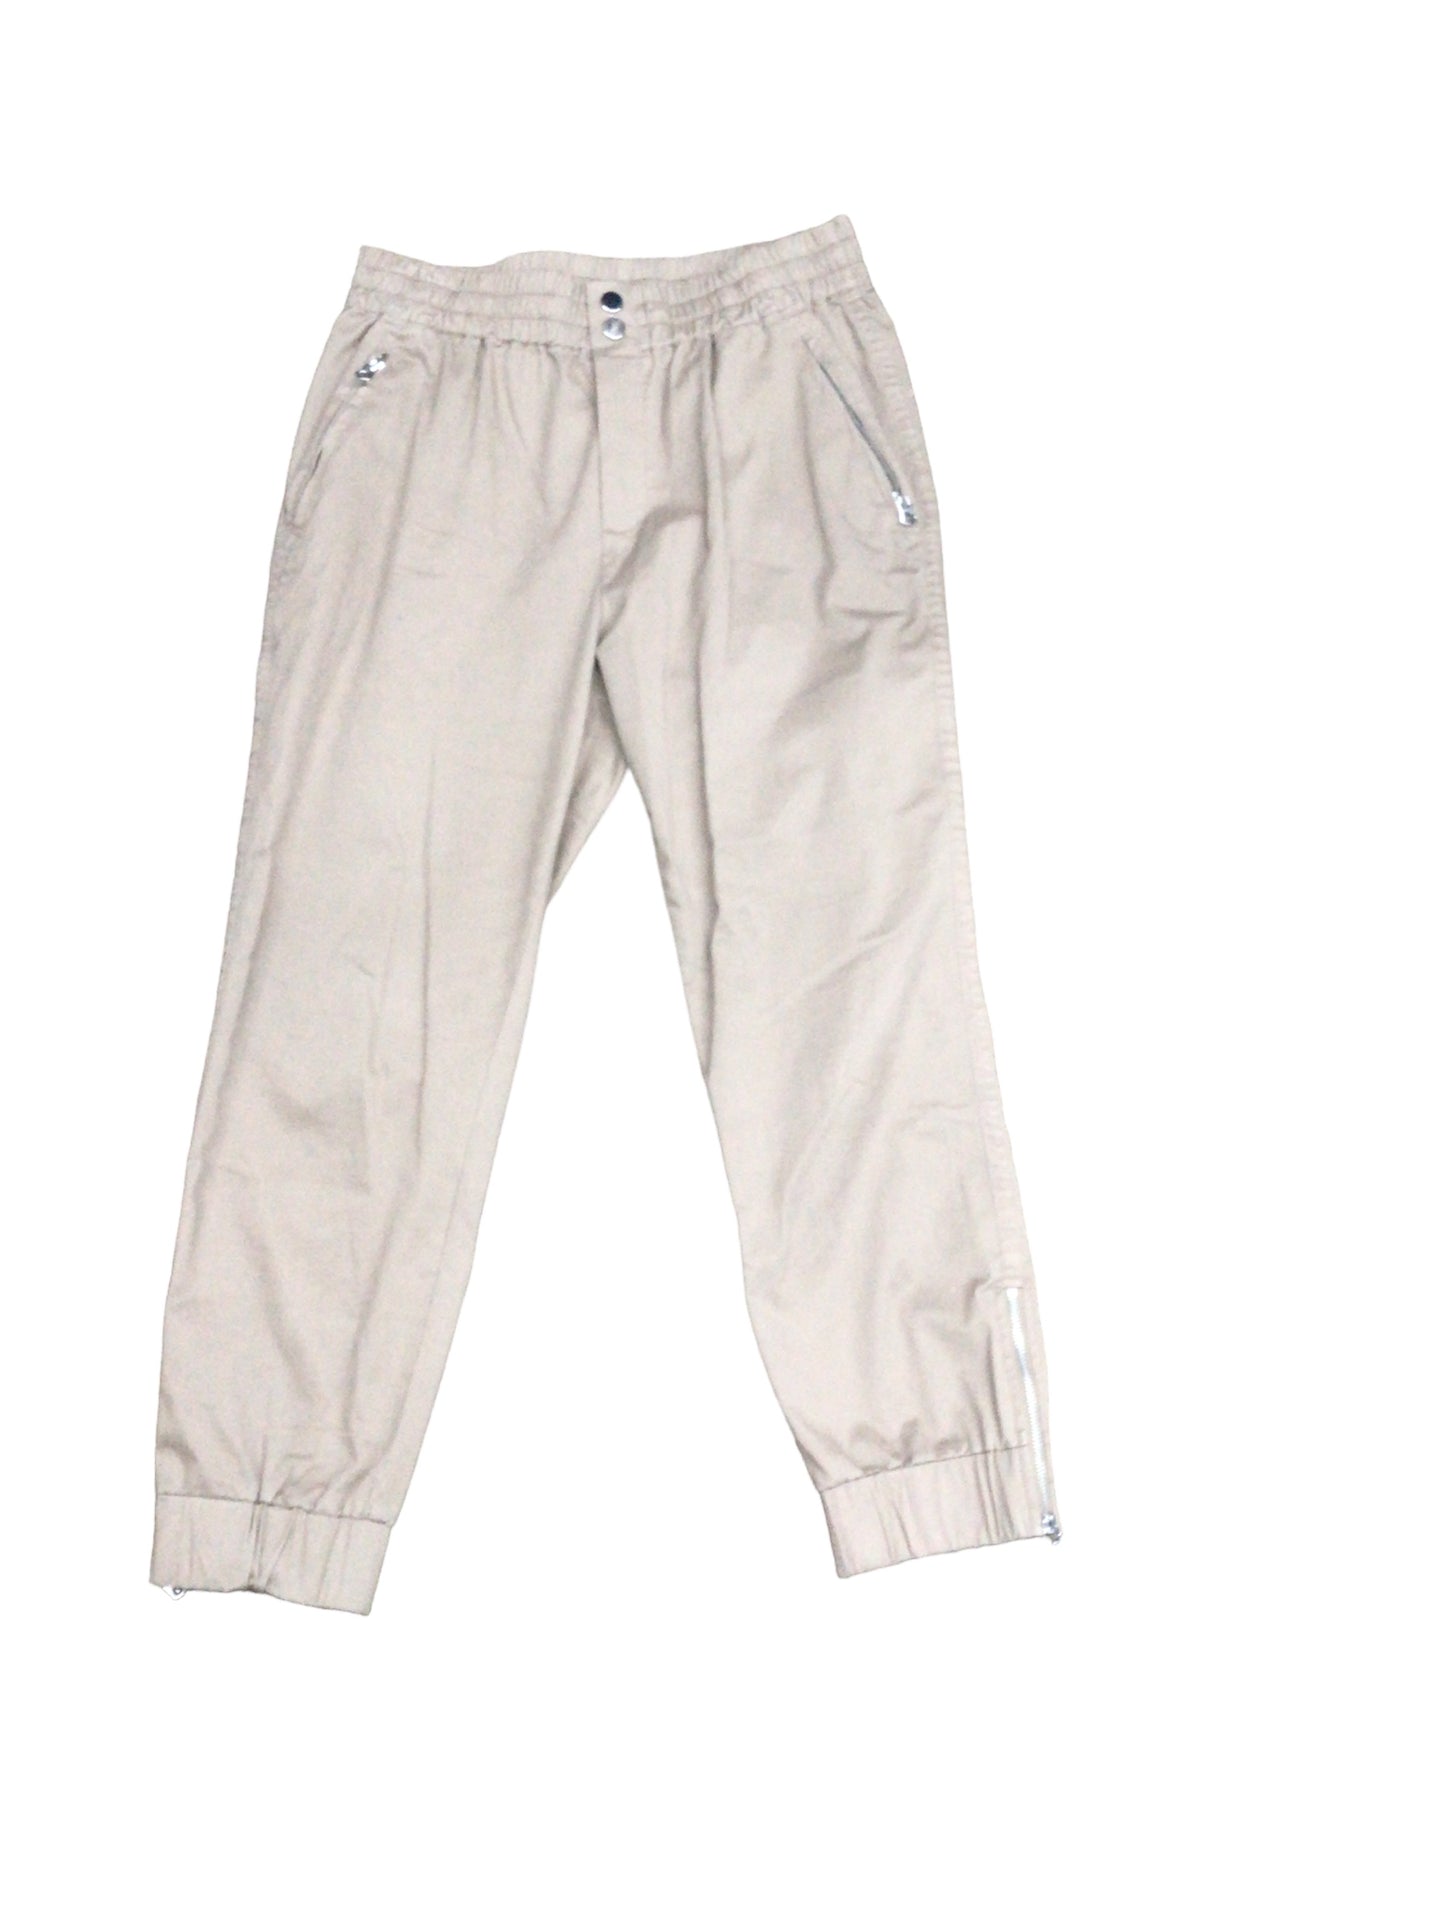 Pants Joggers By Varley  Size: L